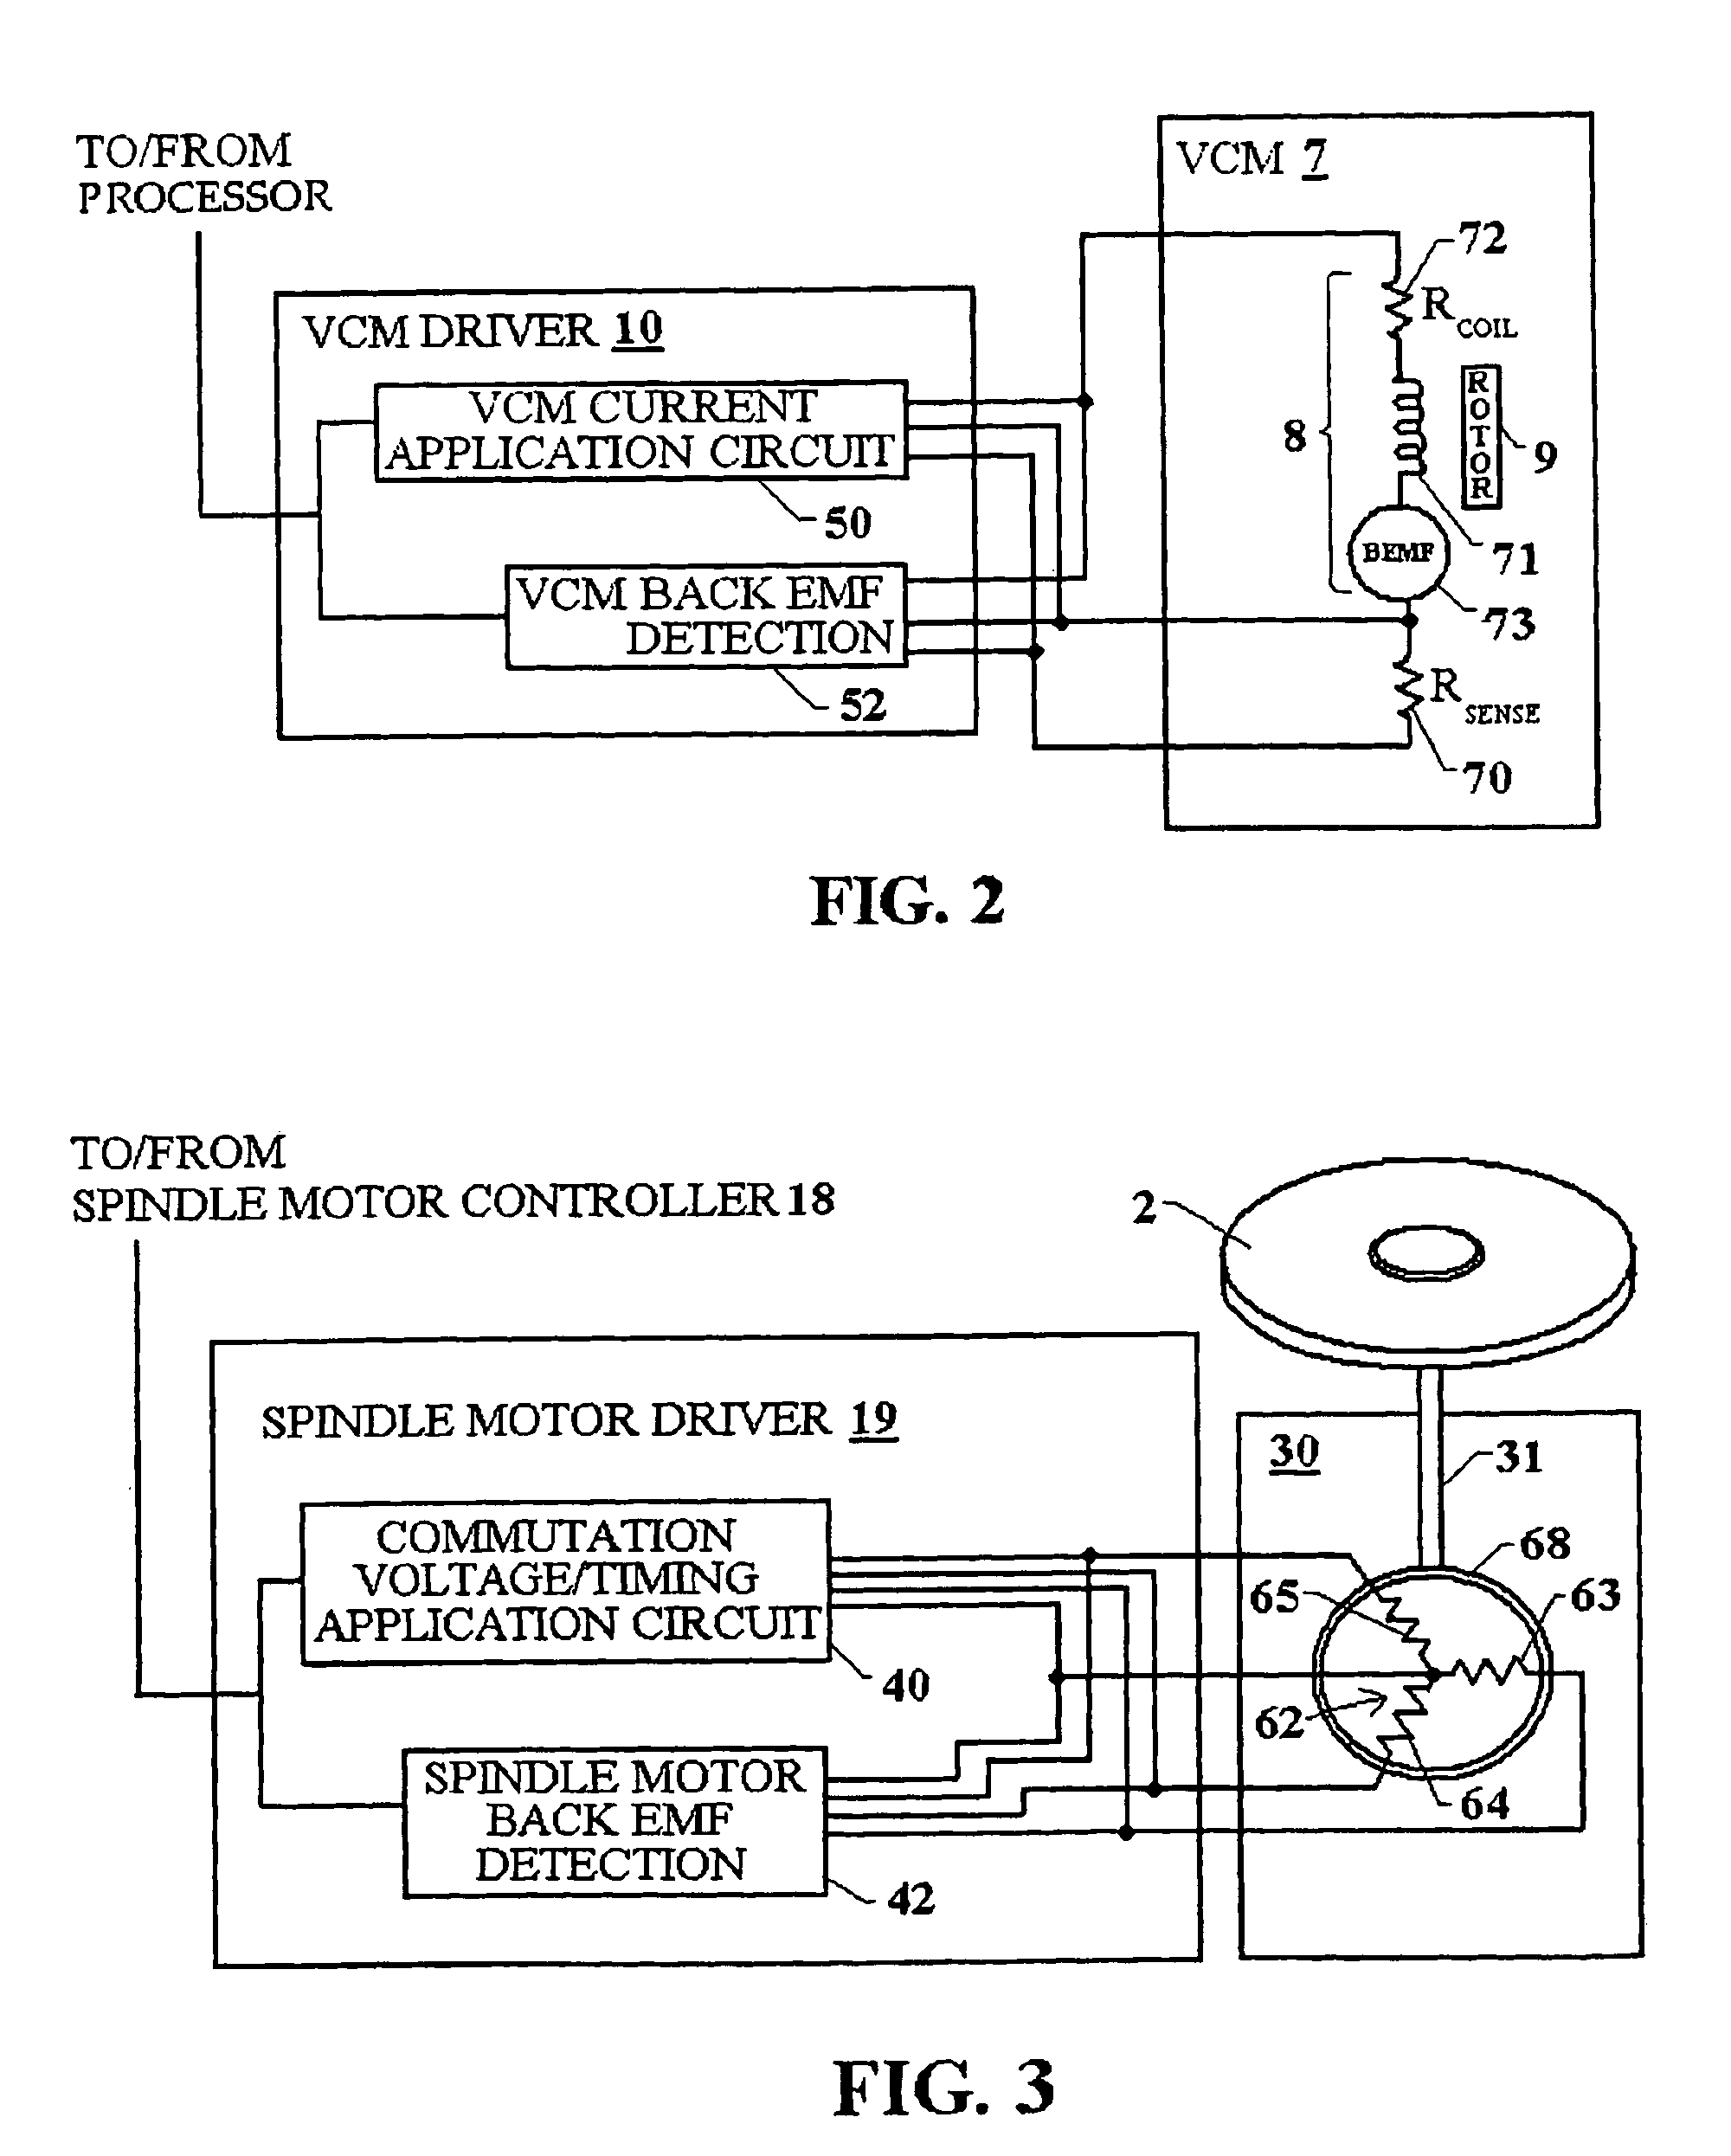 Apparatus for spindle bearing friction estimation for reliable disk drive startup